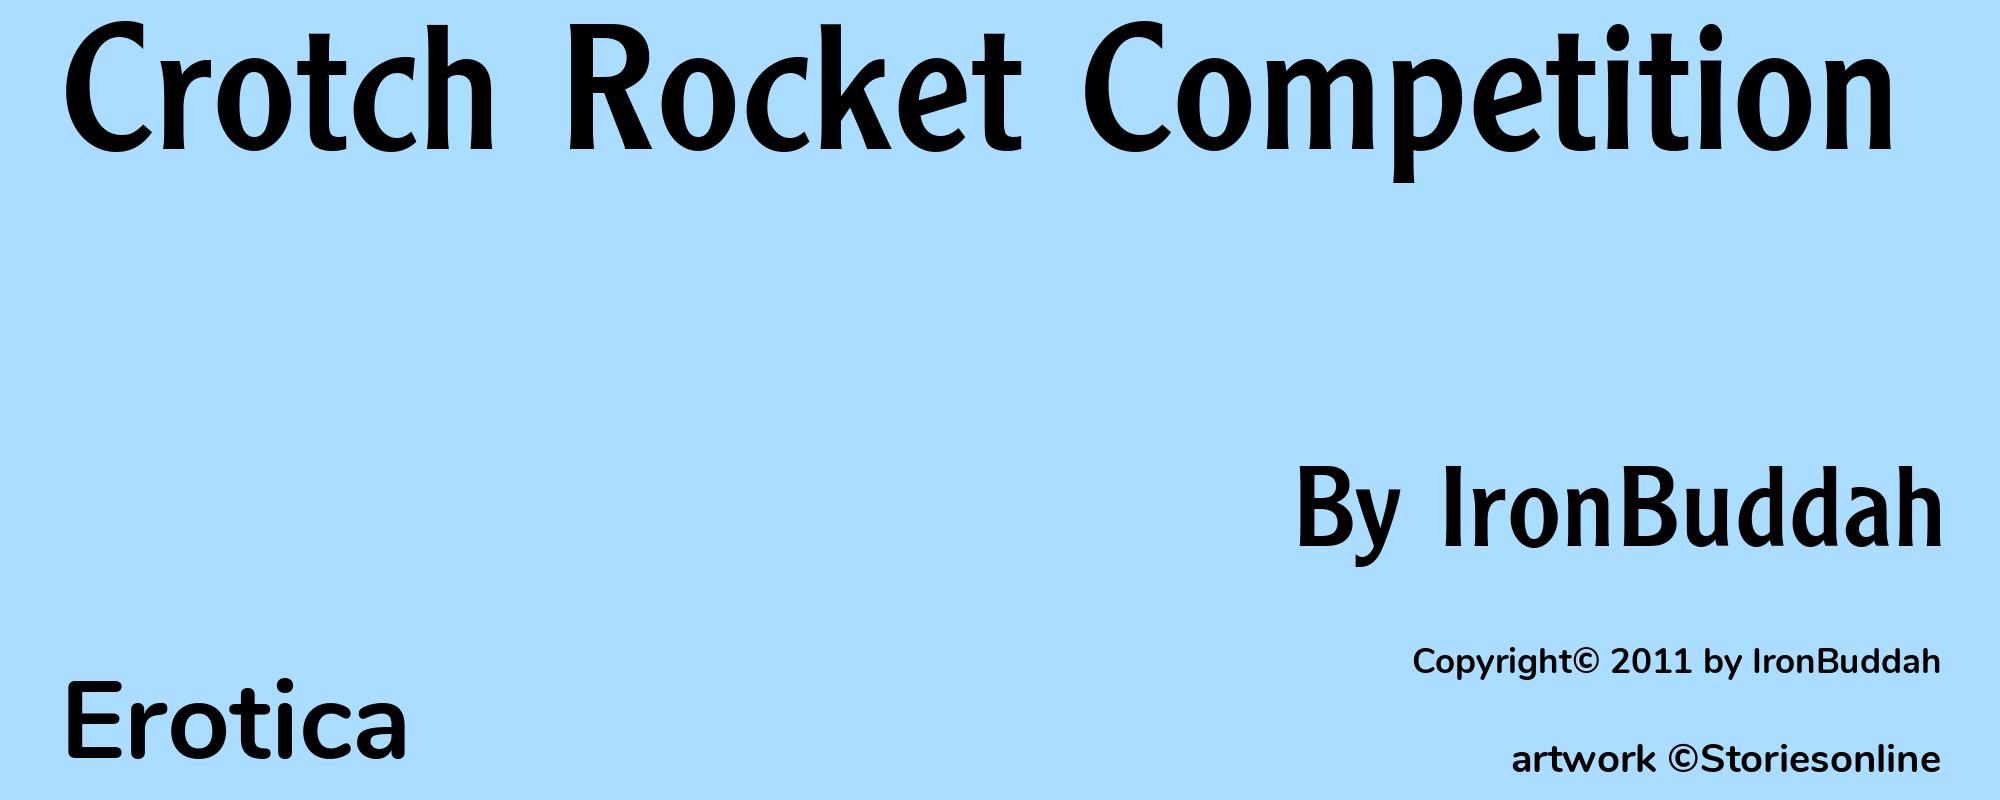 Crotch Rocket Competition - Cover